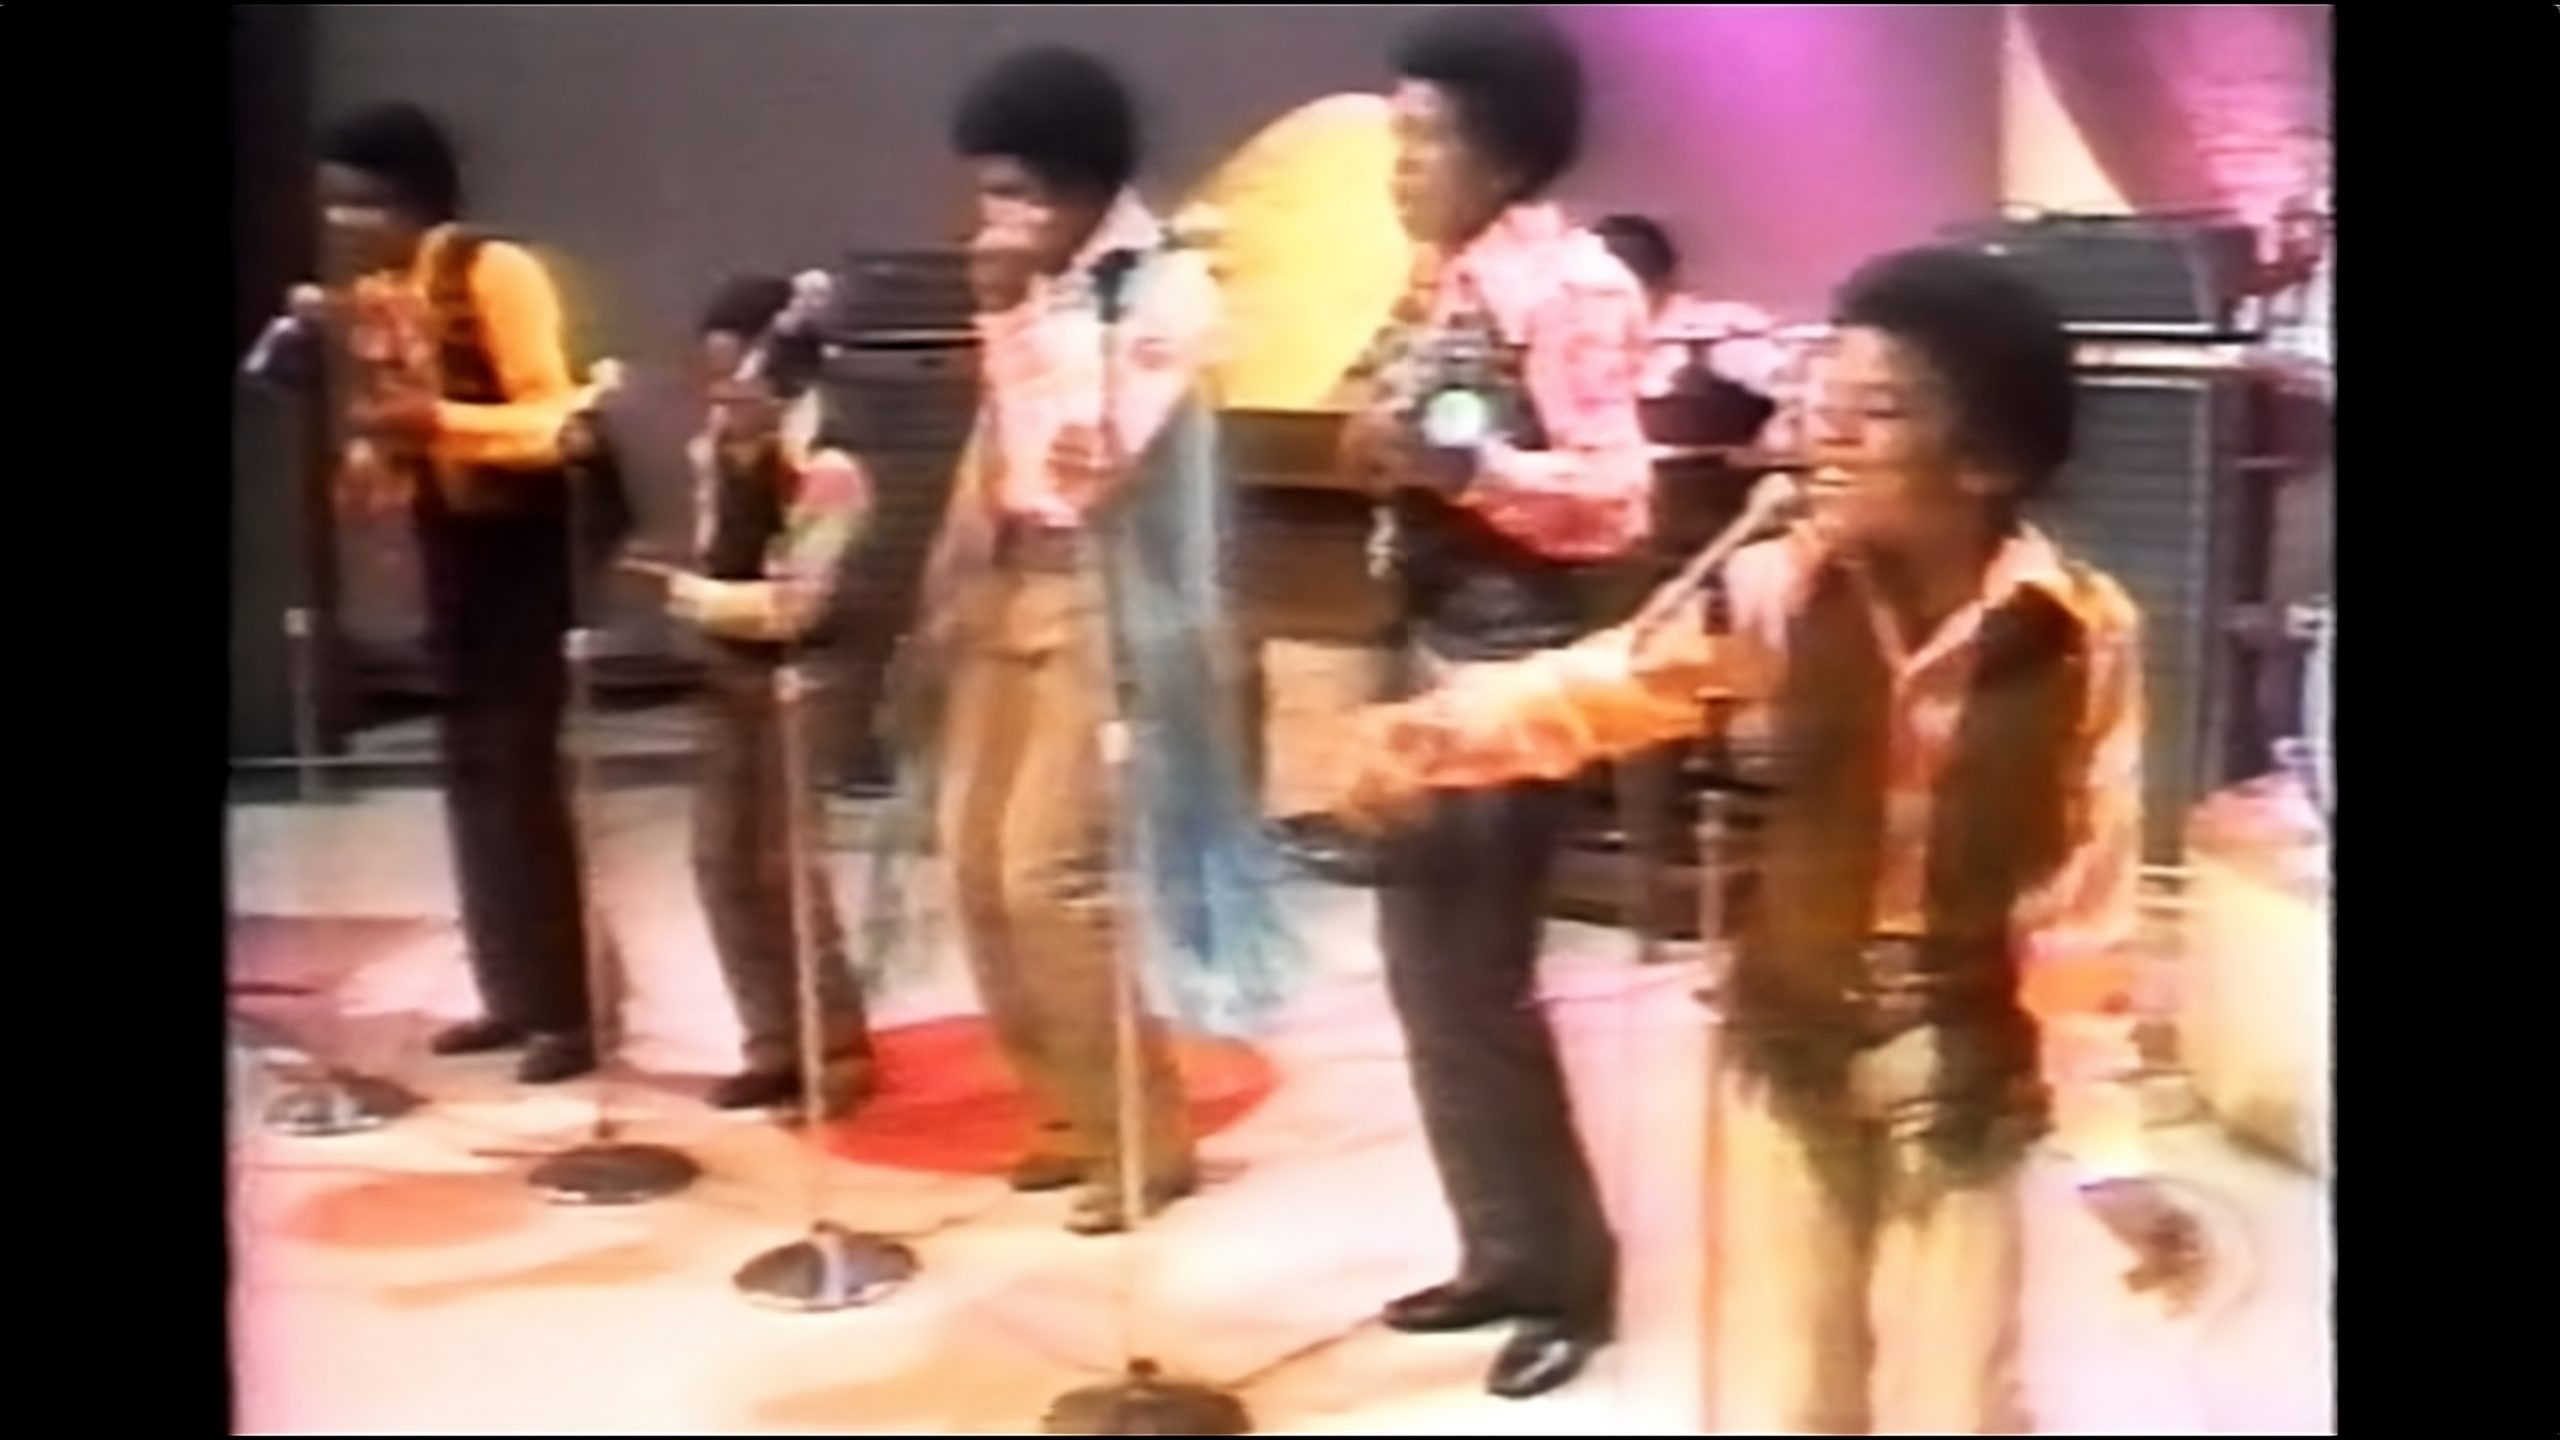 The Jackson 5 on “American Bandstand”: When Five Brothers from Gary, Indiana, Became America’s Favorite Siblings